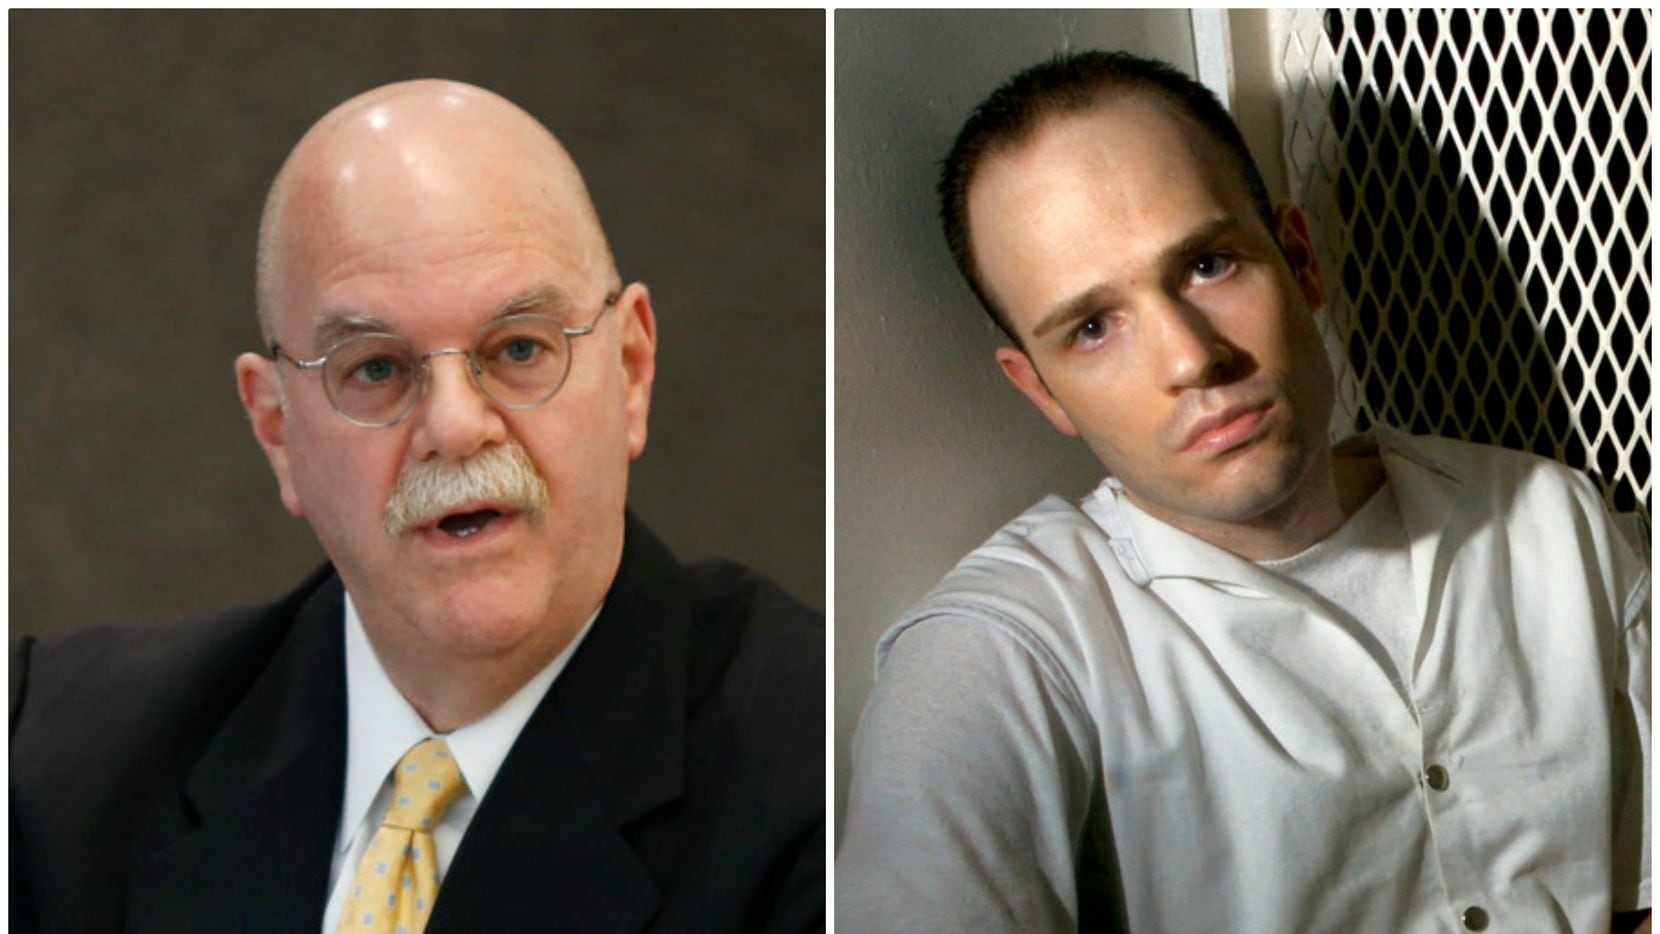 Former state District Judge Vickers Cunningham sent Randy Halprin to death row in 2003, two years after an Irving police officer was slain by the Texas 7 prison escapees. Halprin, who is Jewish, says he deserves a new trial because Cunningham has made anti-Semitic and racist comments and never should have presided over Halprin's trial.Edtor'